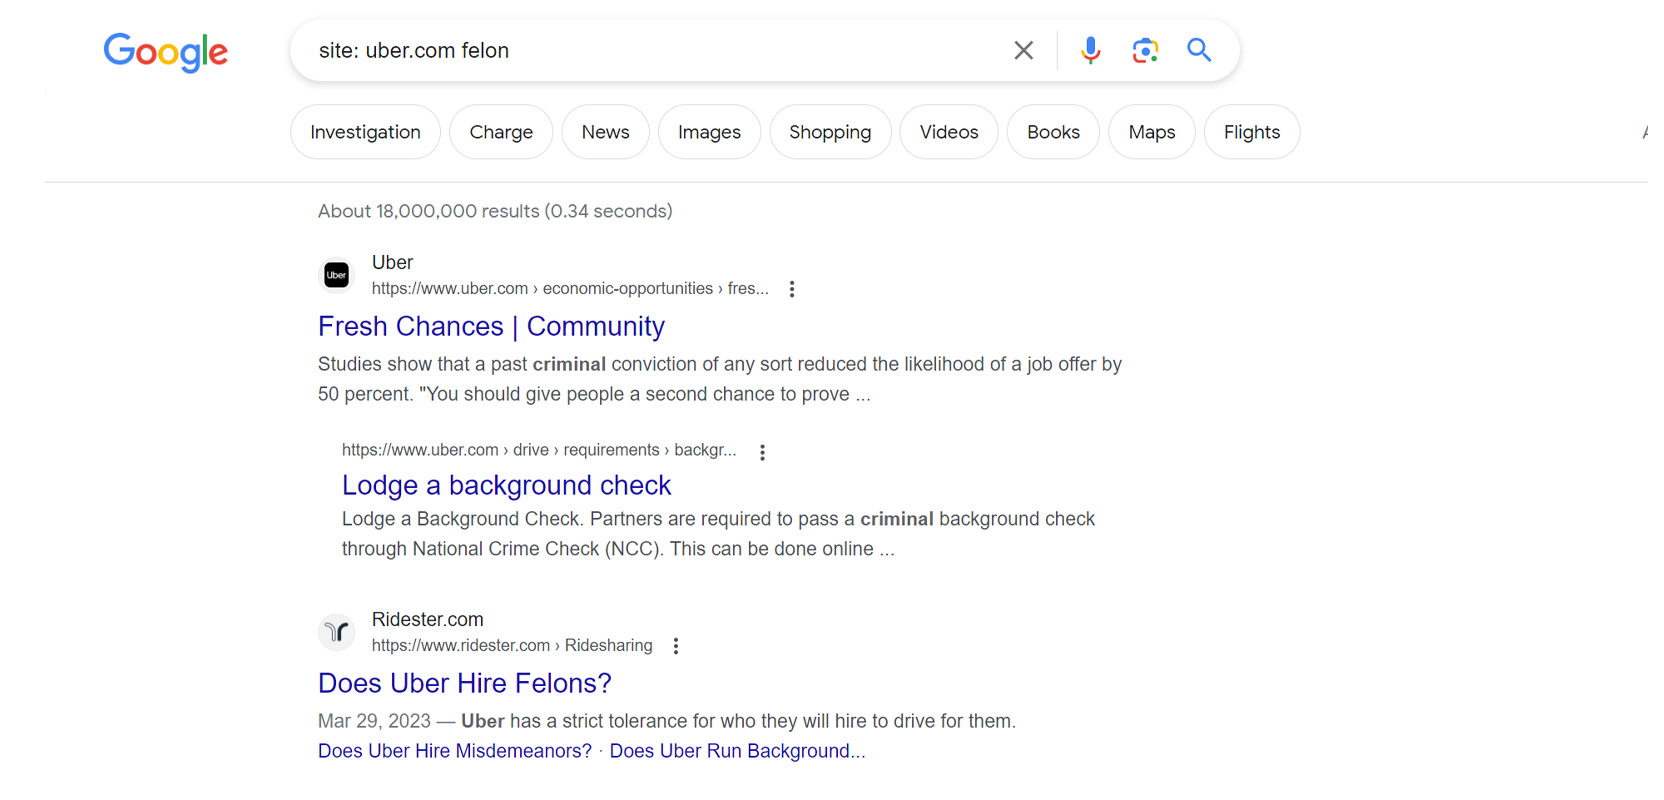 Screenshot of a Google search for Uber's policies on hiring felons